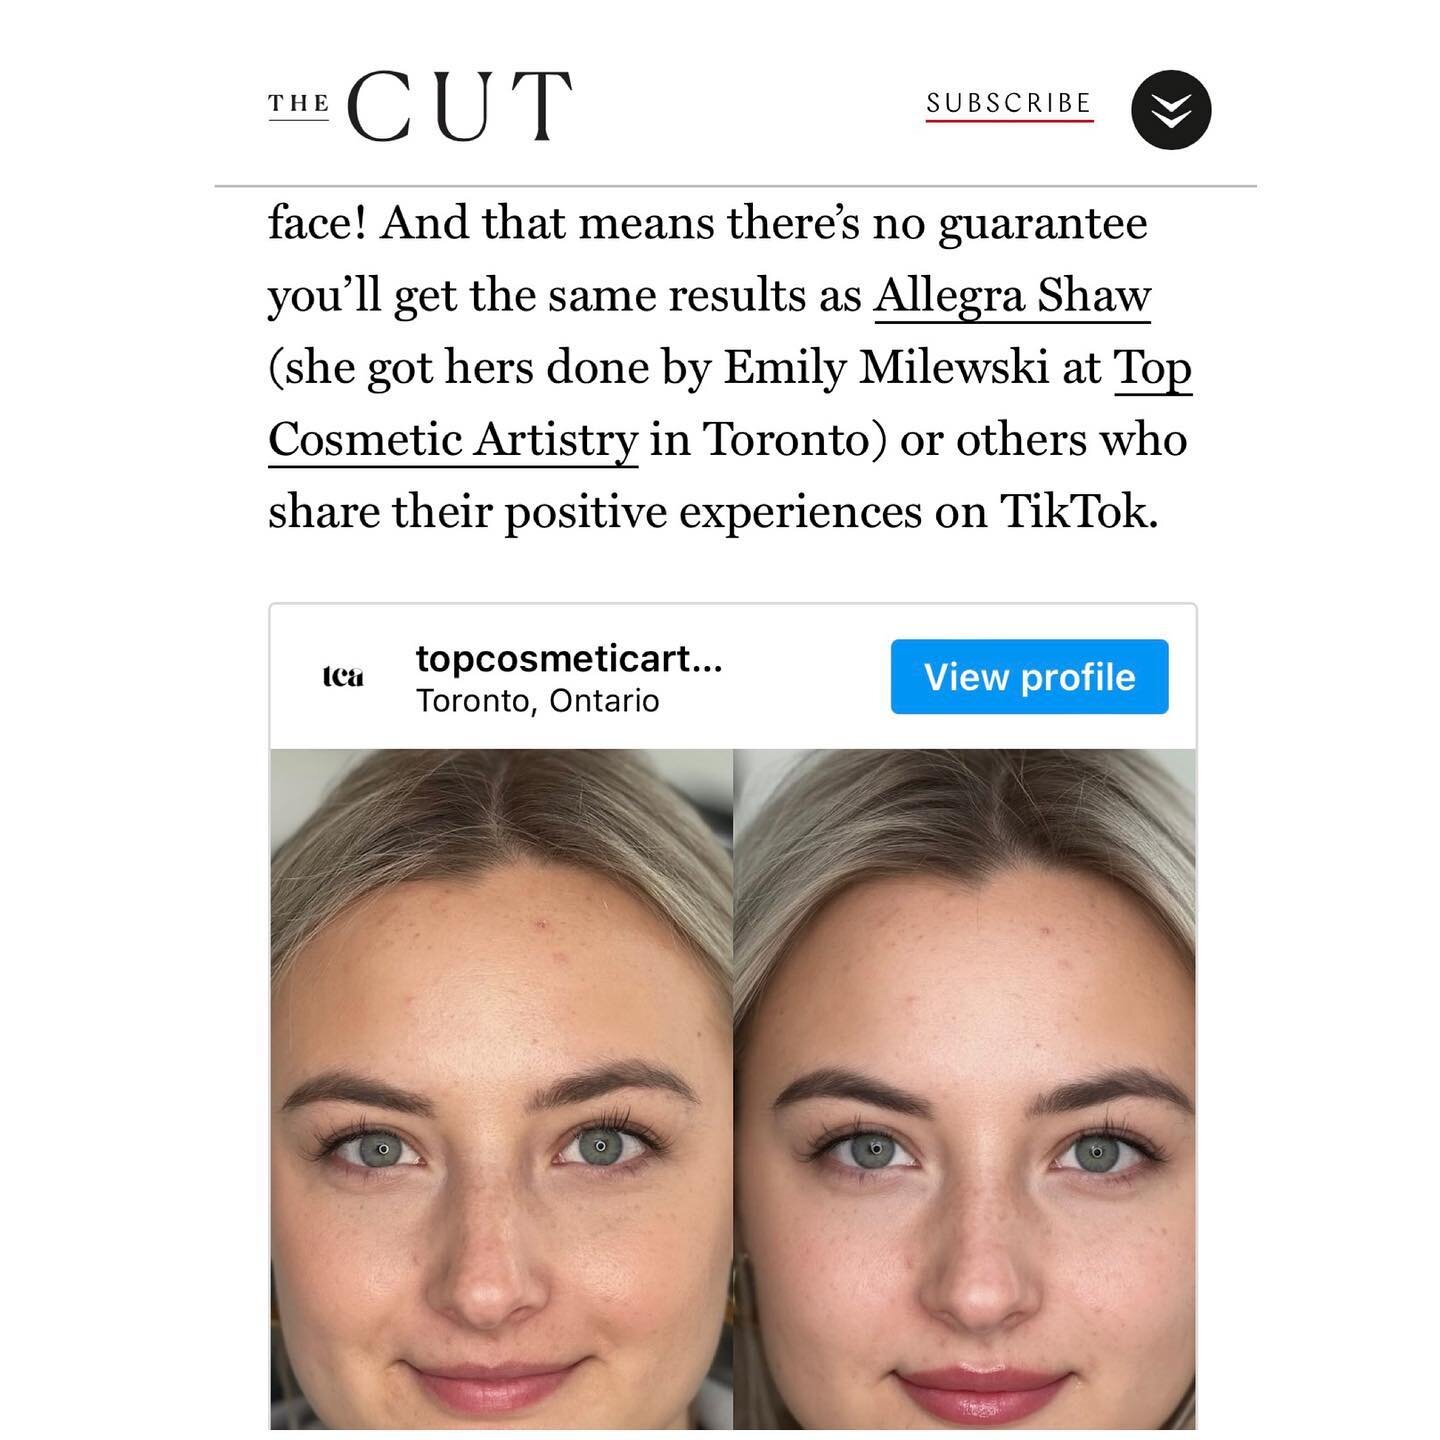 Thank you so much for the feature on Lip Blush! 👄 @thecut @jenn_edit @allegrashaw